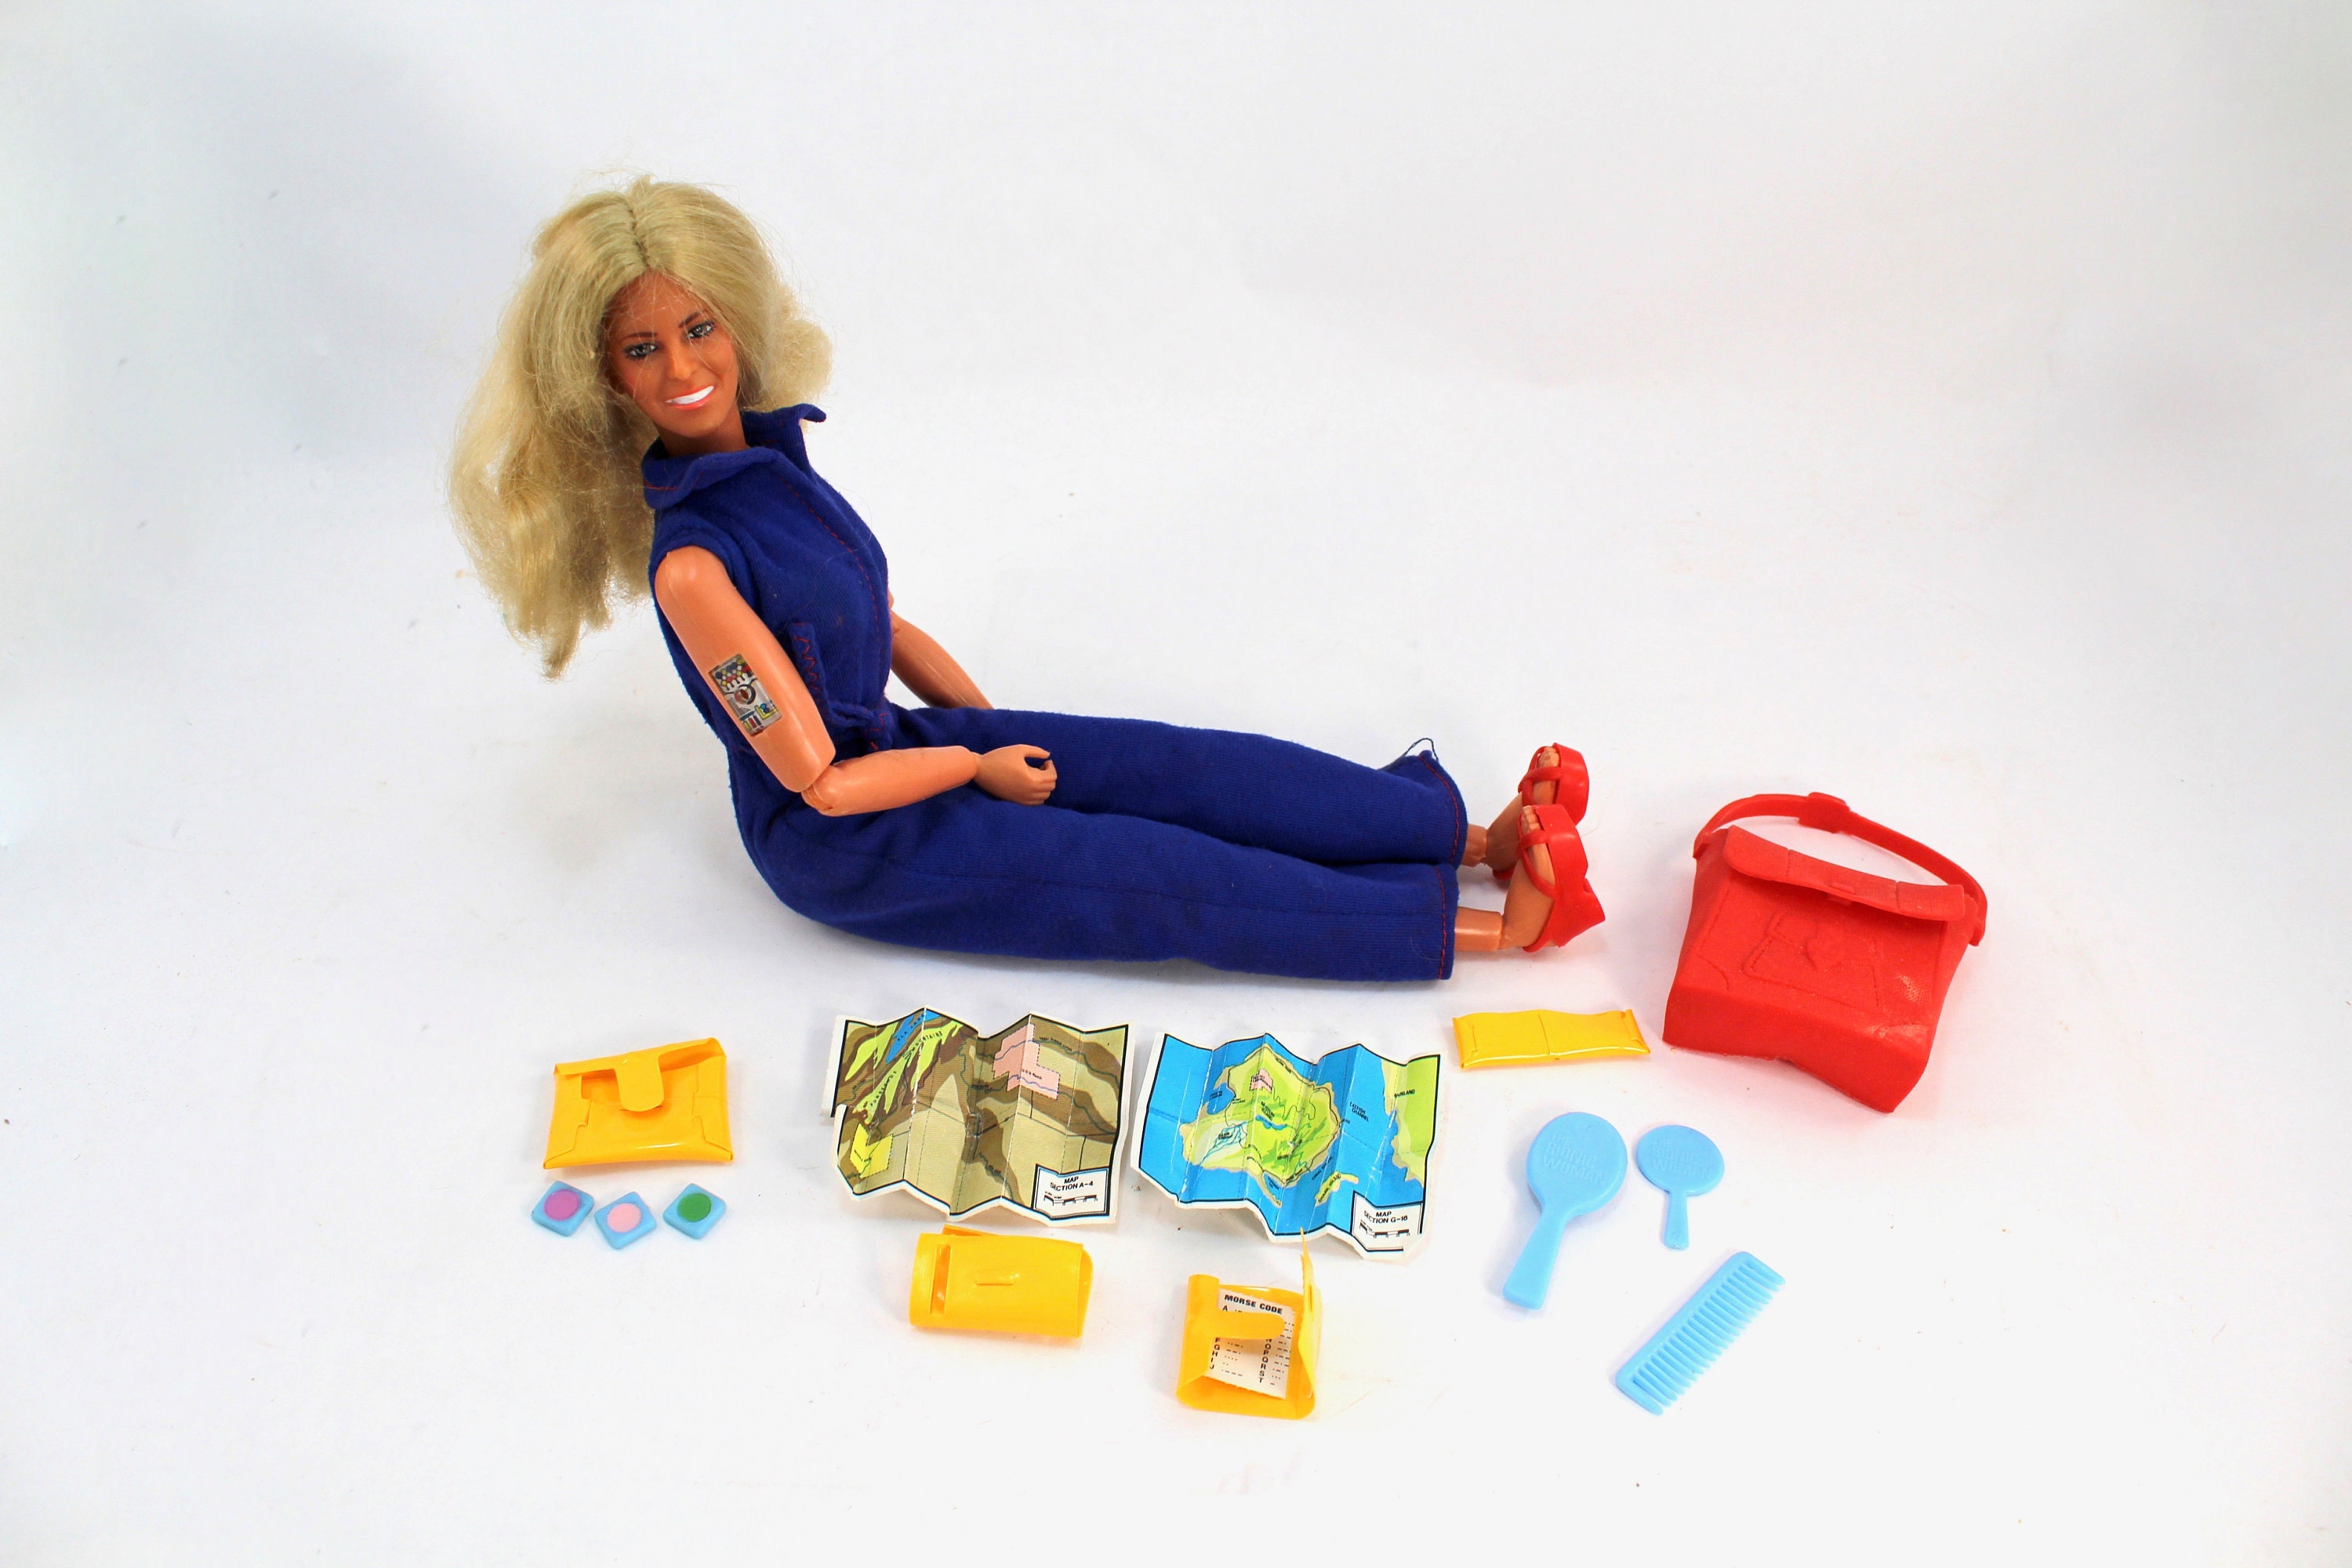 Vintage Bionic Woman Doll and Accessories Kenner, Action Figure, Toys,  Jaime Sommers, Jamie, 1970s, 70s, Girl Toys, Original, TV Shows 